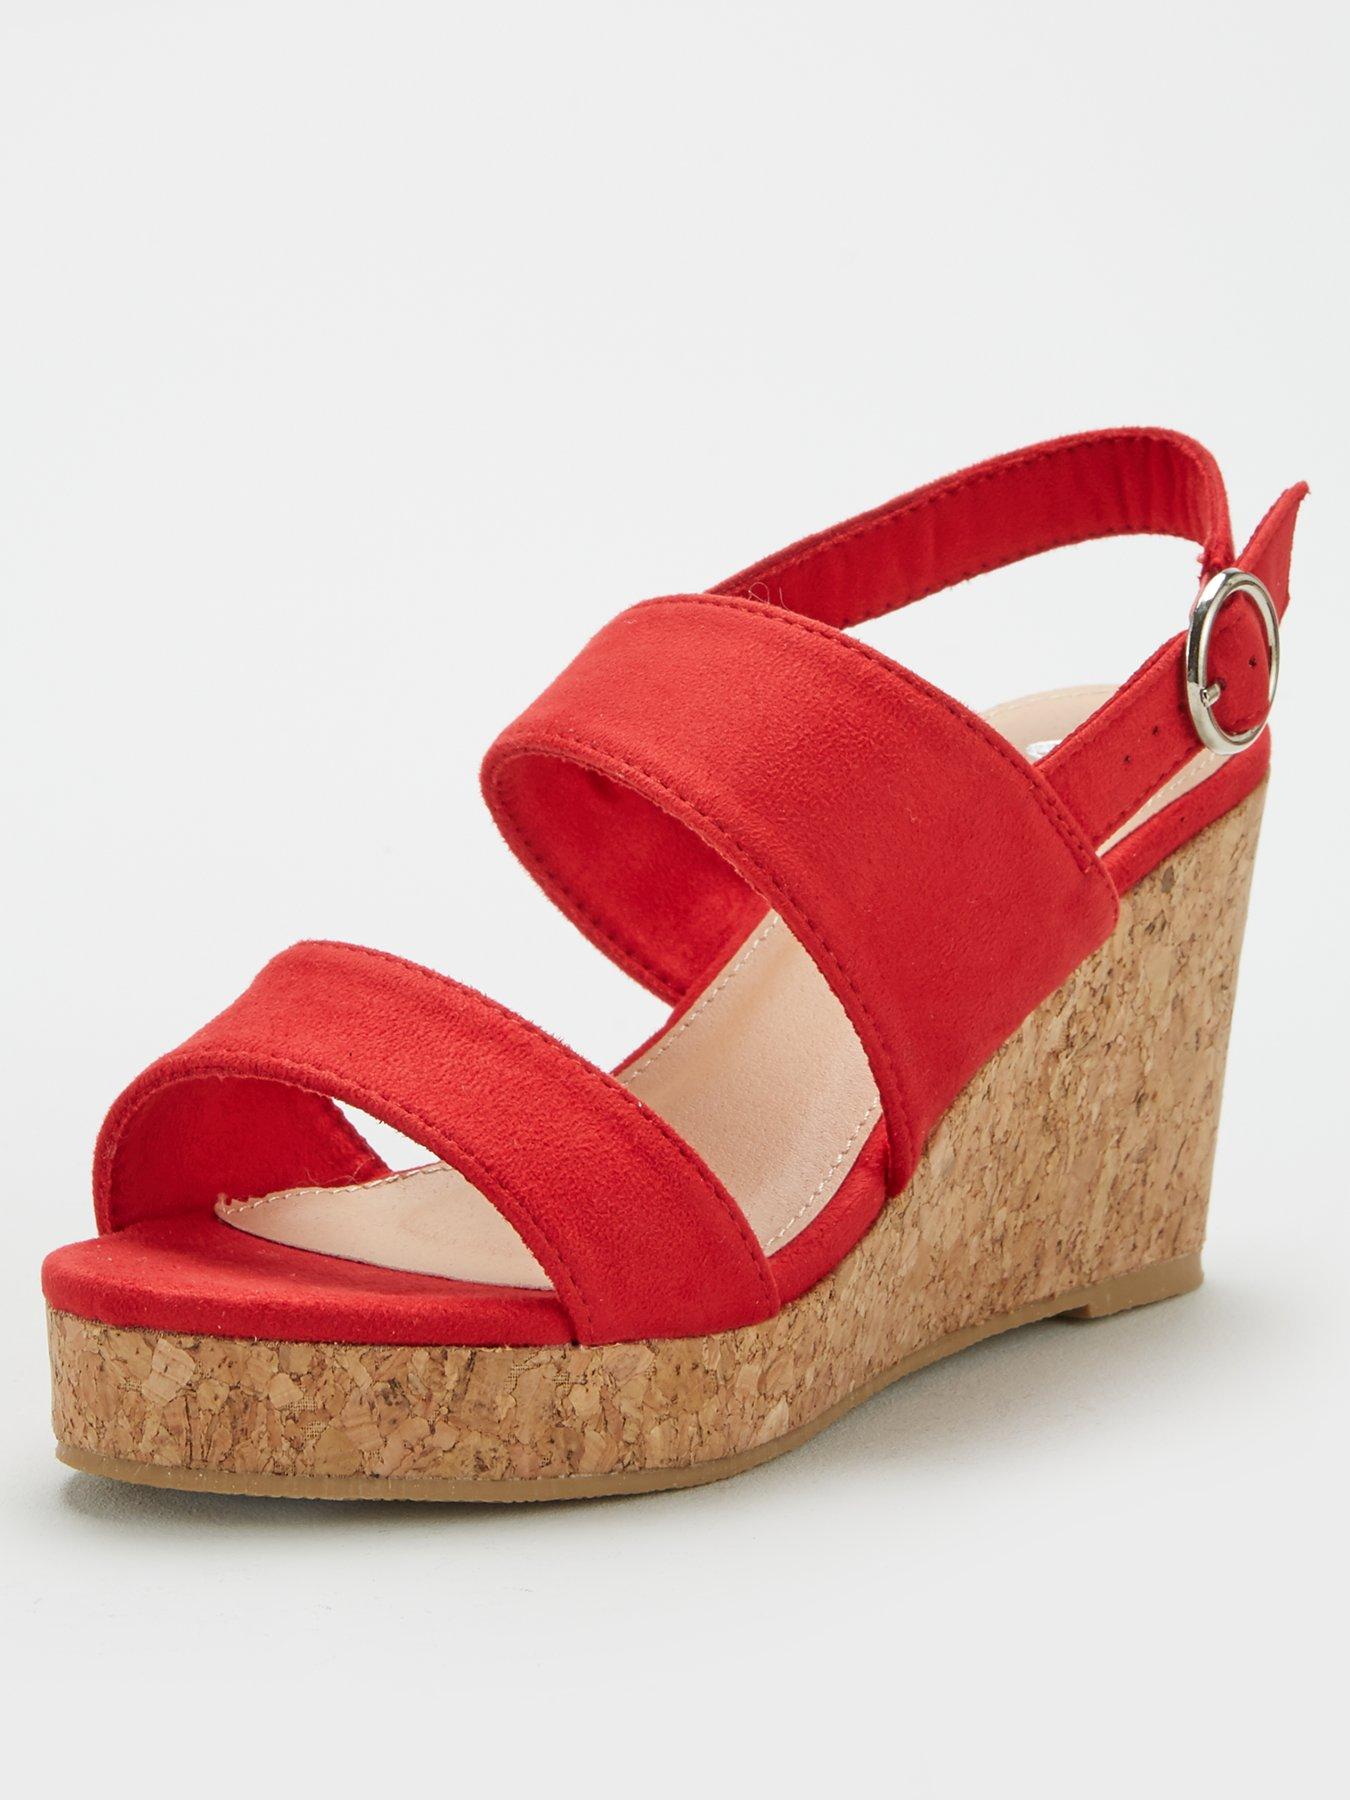 red wedge sandals uk